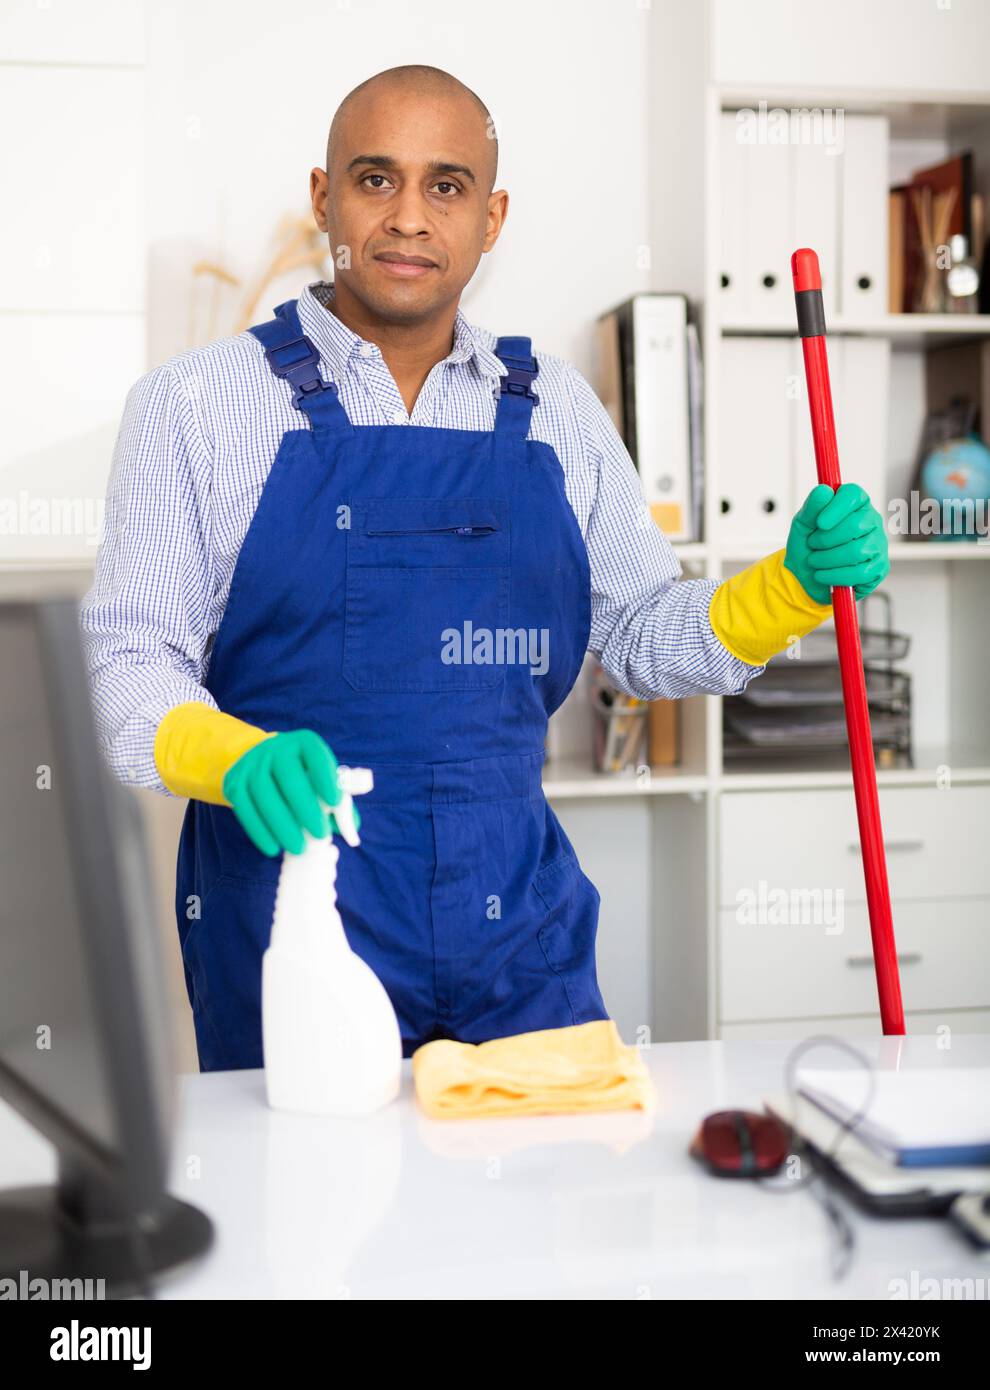 Portrait of male worker with broom cleaning office Stock Photo